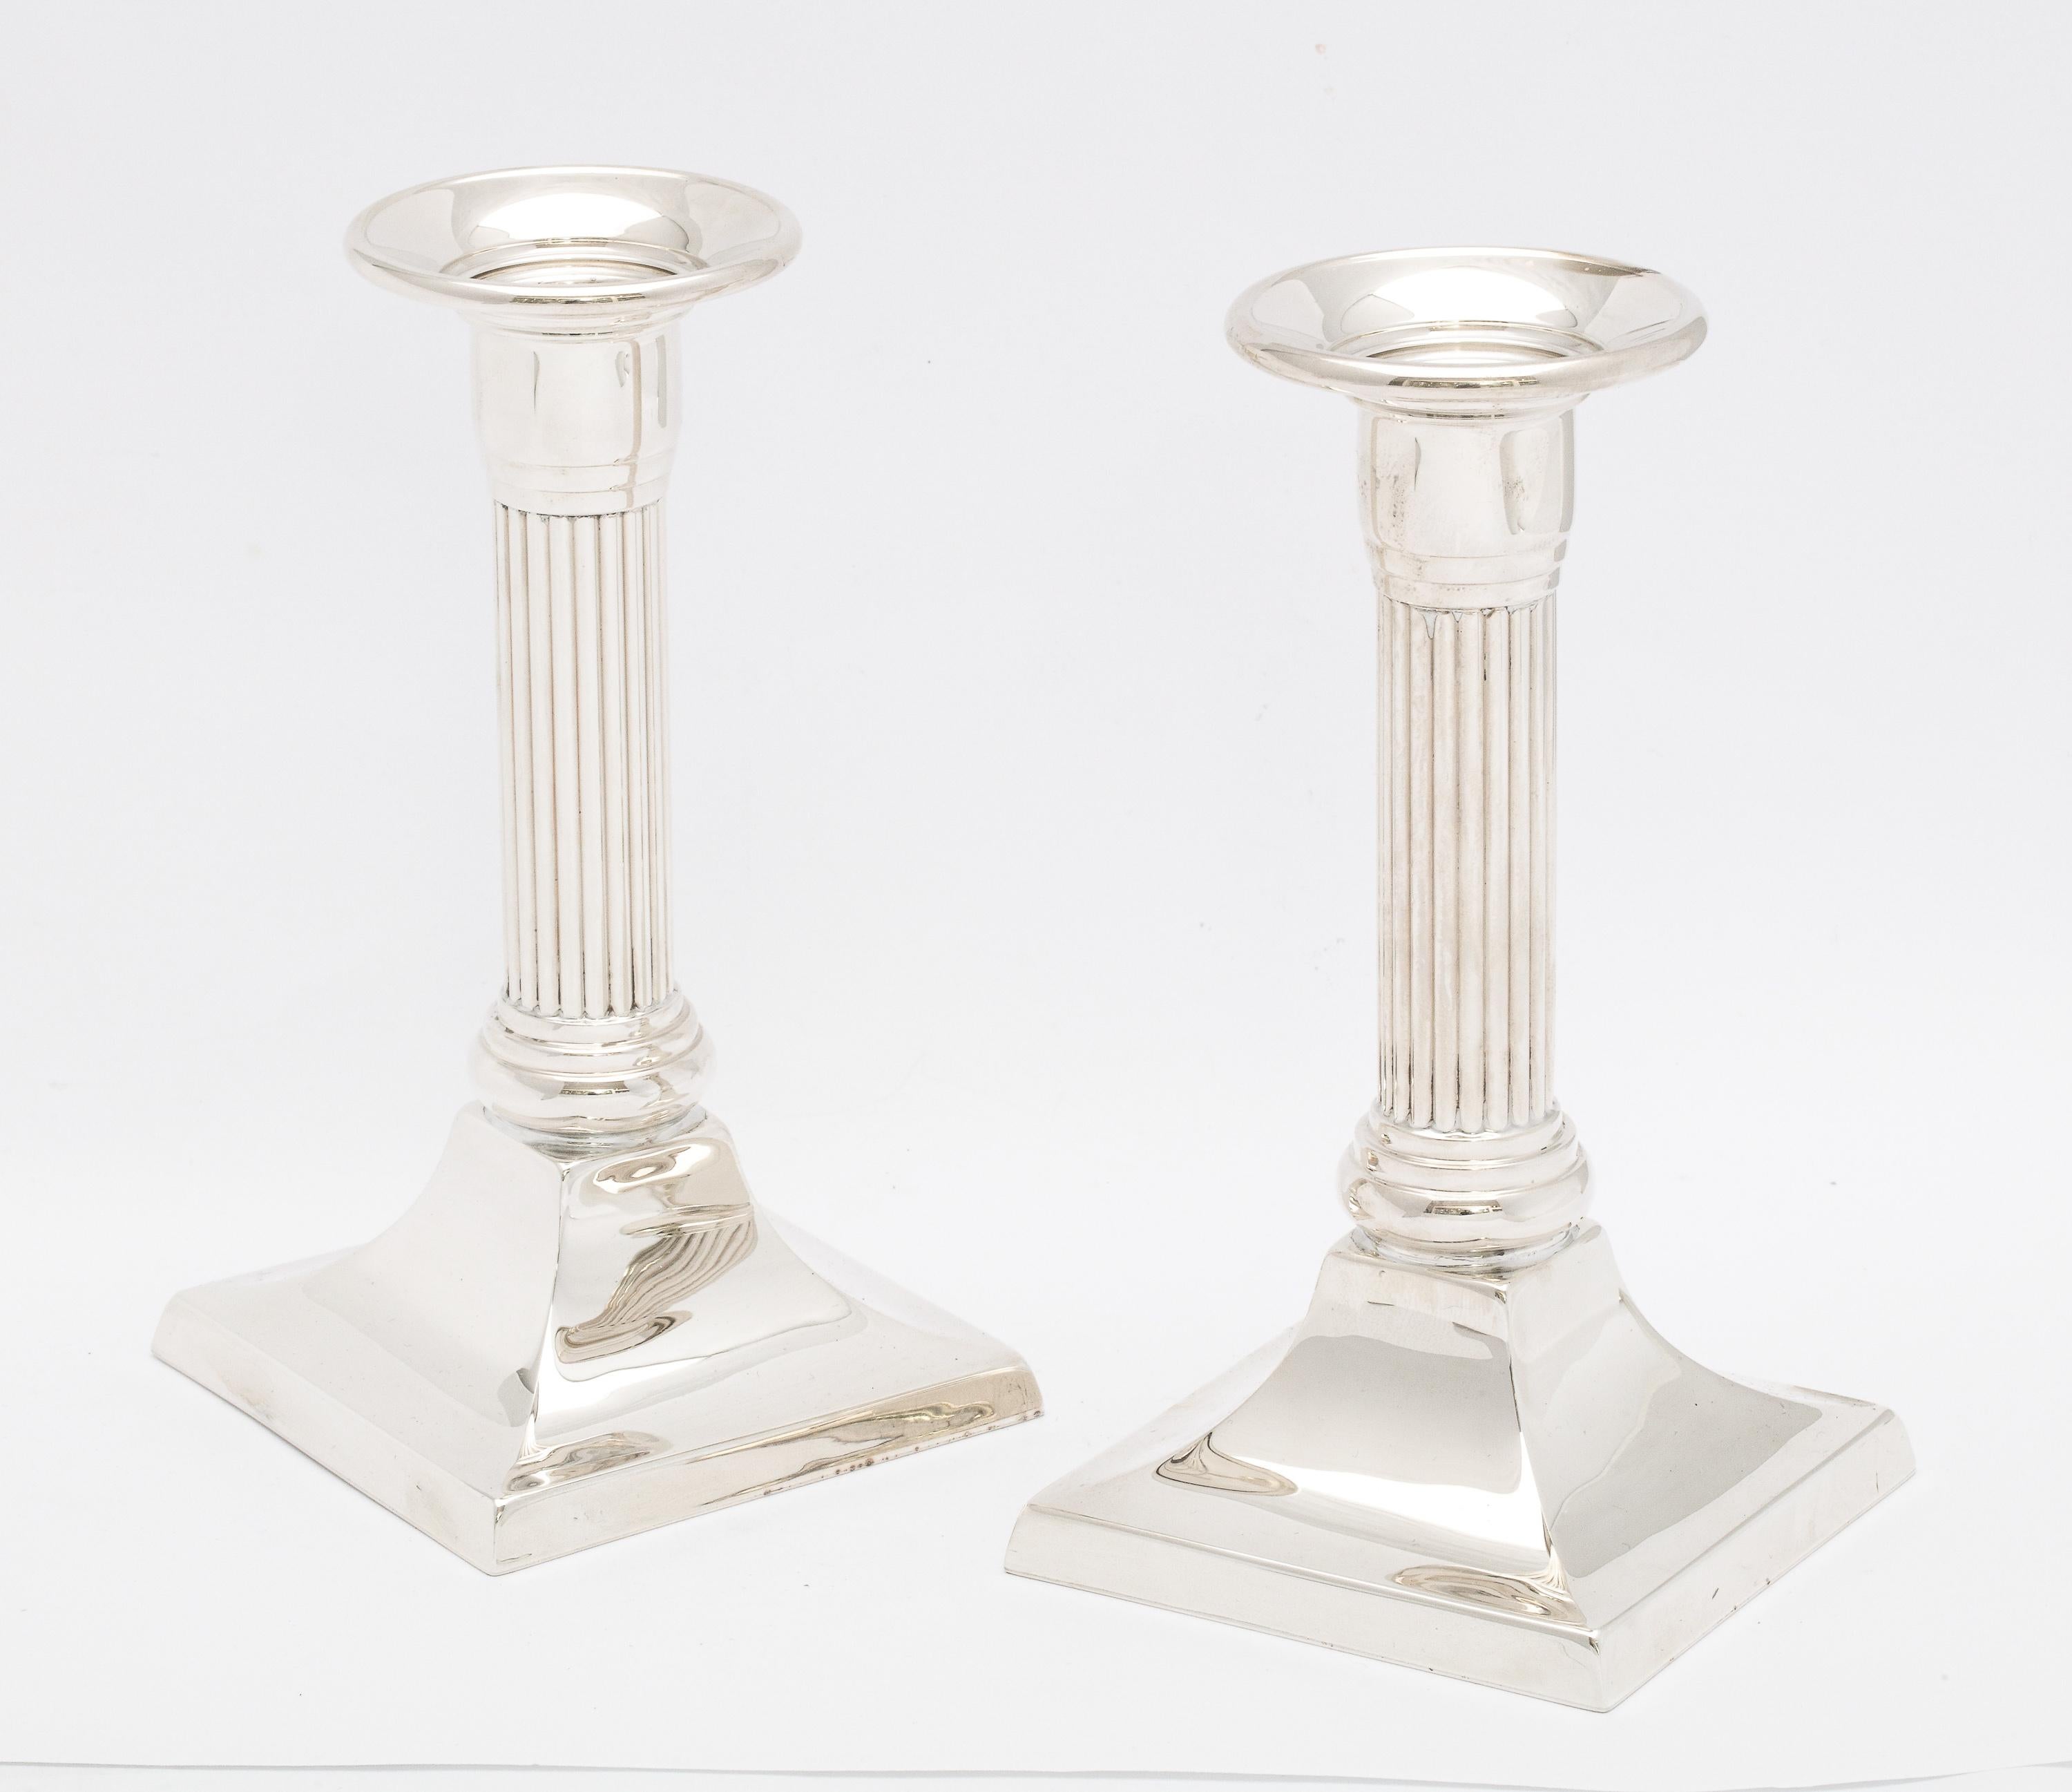 Pair of neoclassical-Style, sterling silver, column-form candlesticks, Empire Silver Company, New York, Ca. 1960's. Each candlestick measures 5 1/2 inches high x 3 inches wide (at widest point) x 3 inches deep (at deepest point). Weighted. Dark